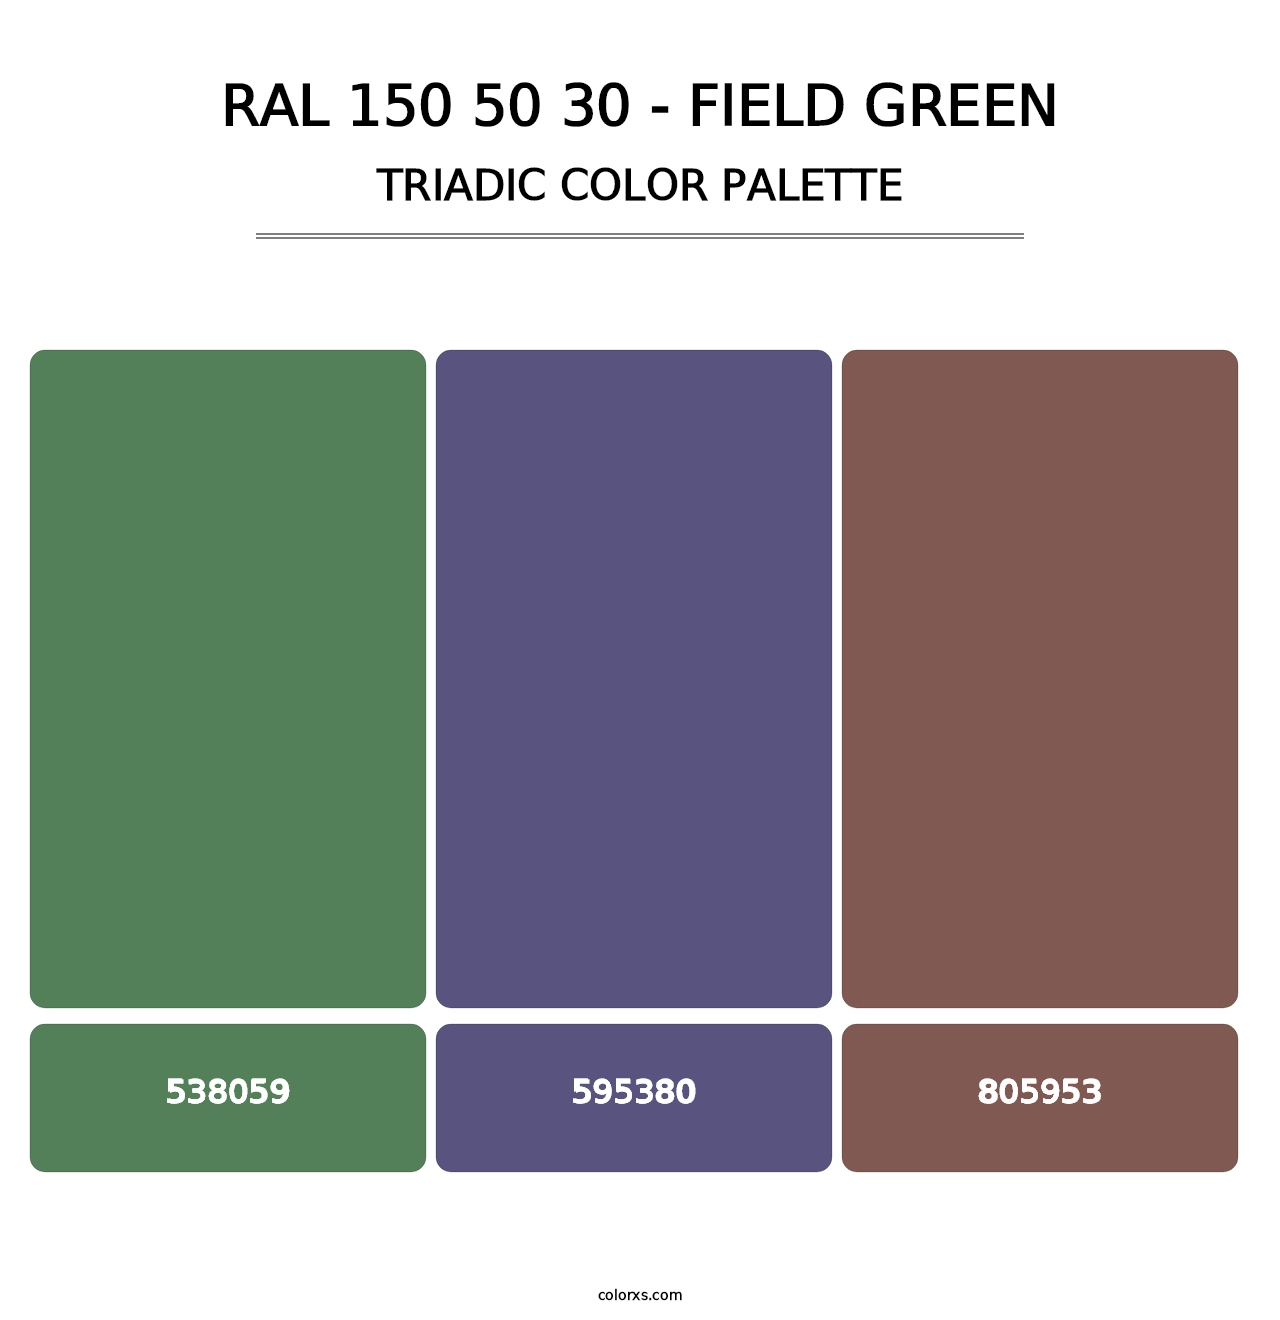 RAL 150 50 30 - Field Green - Triadic Color Palette